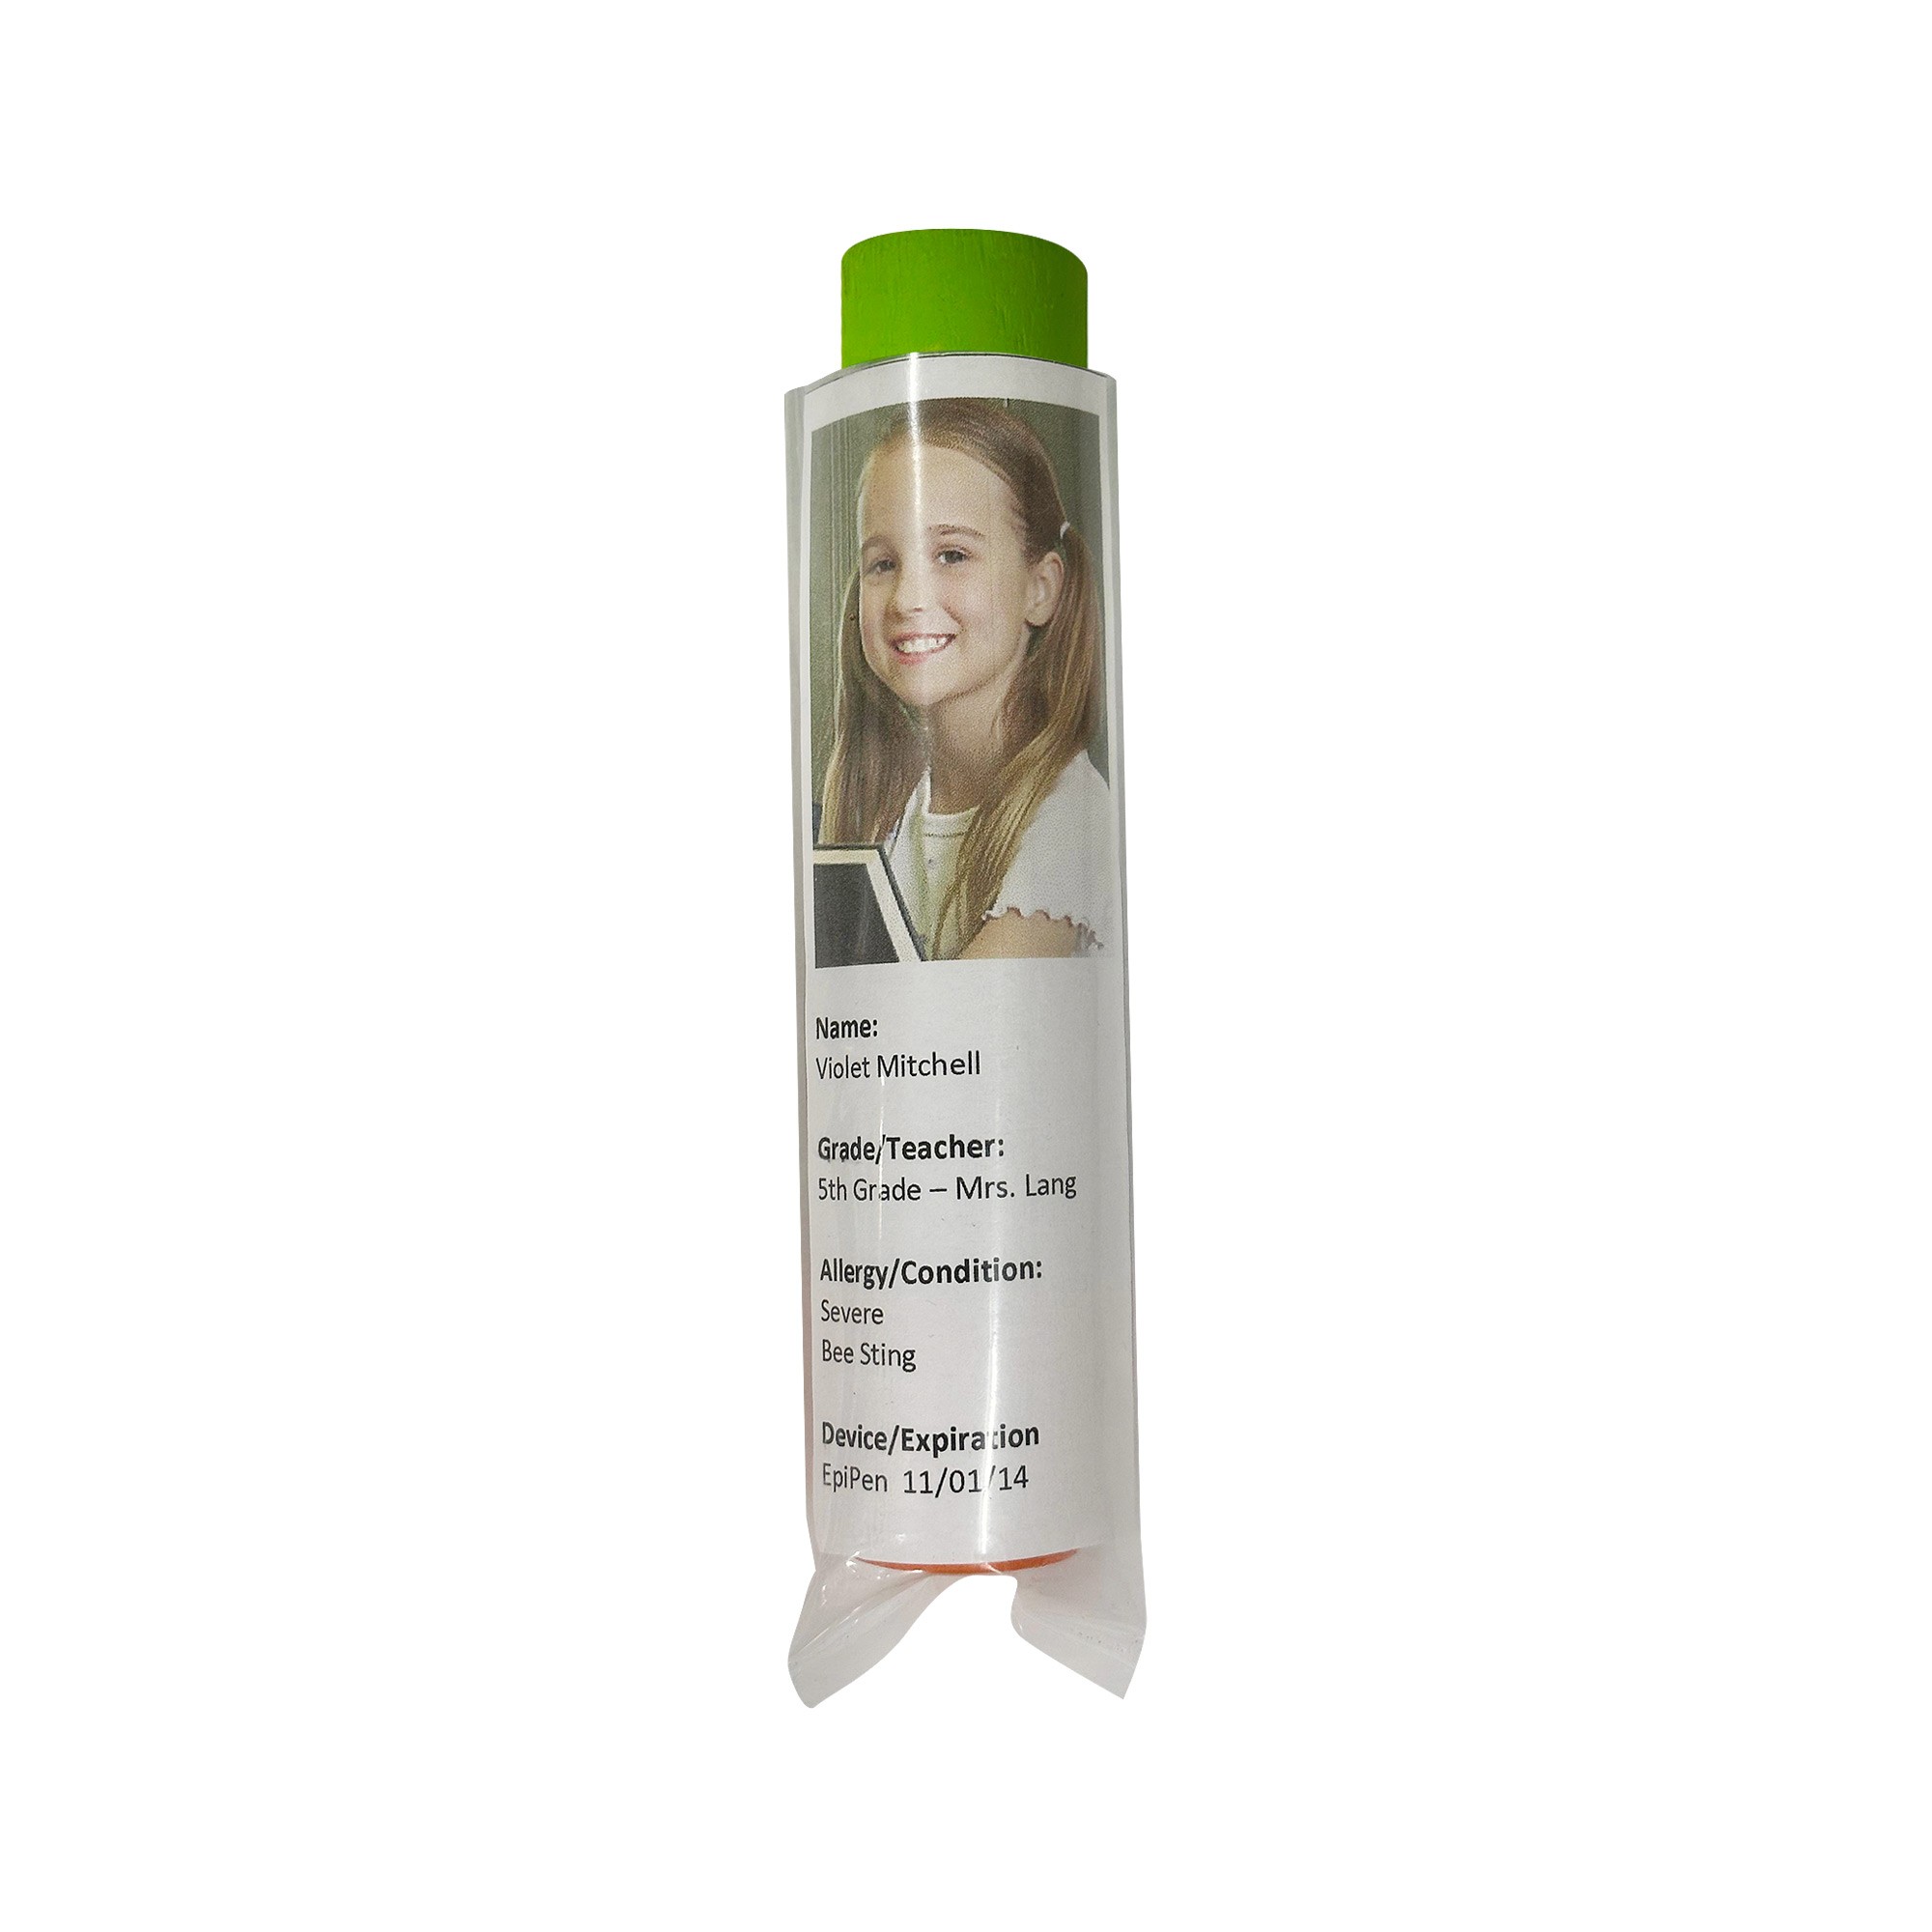 Auto Injector Labeling System